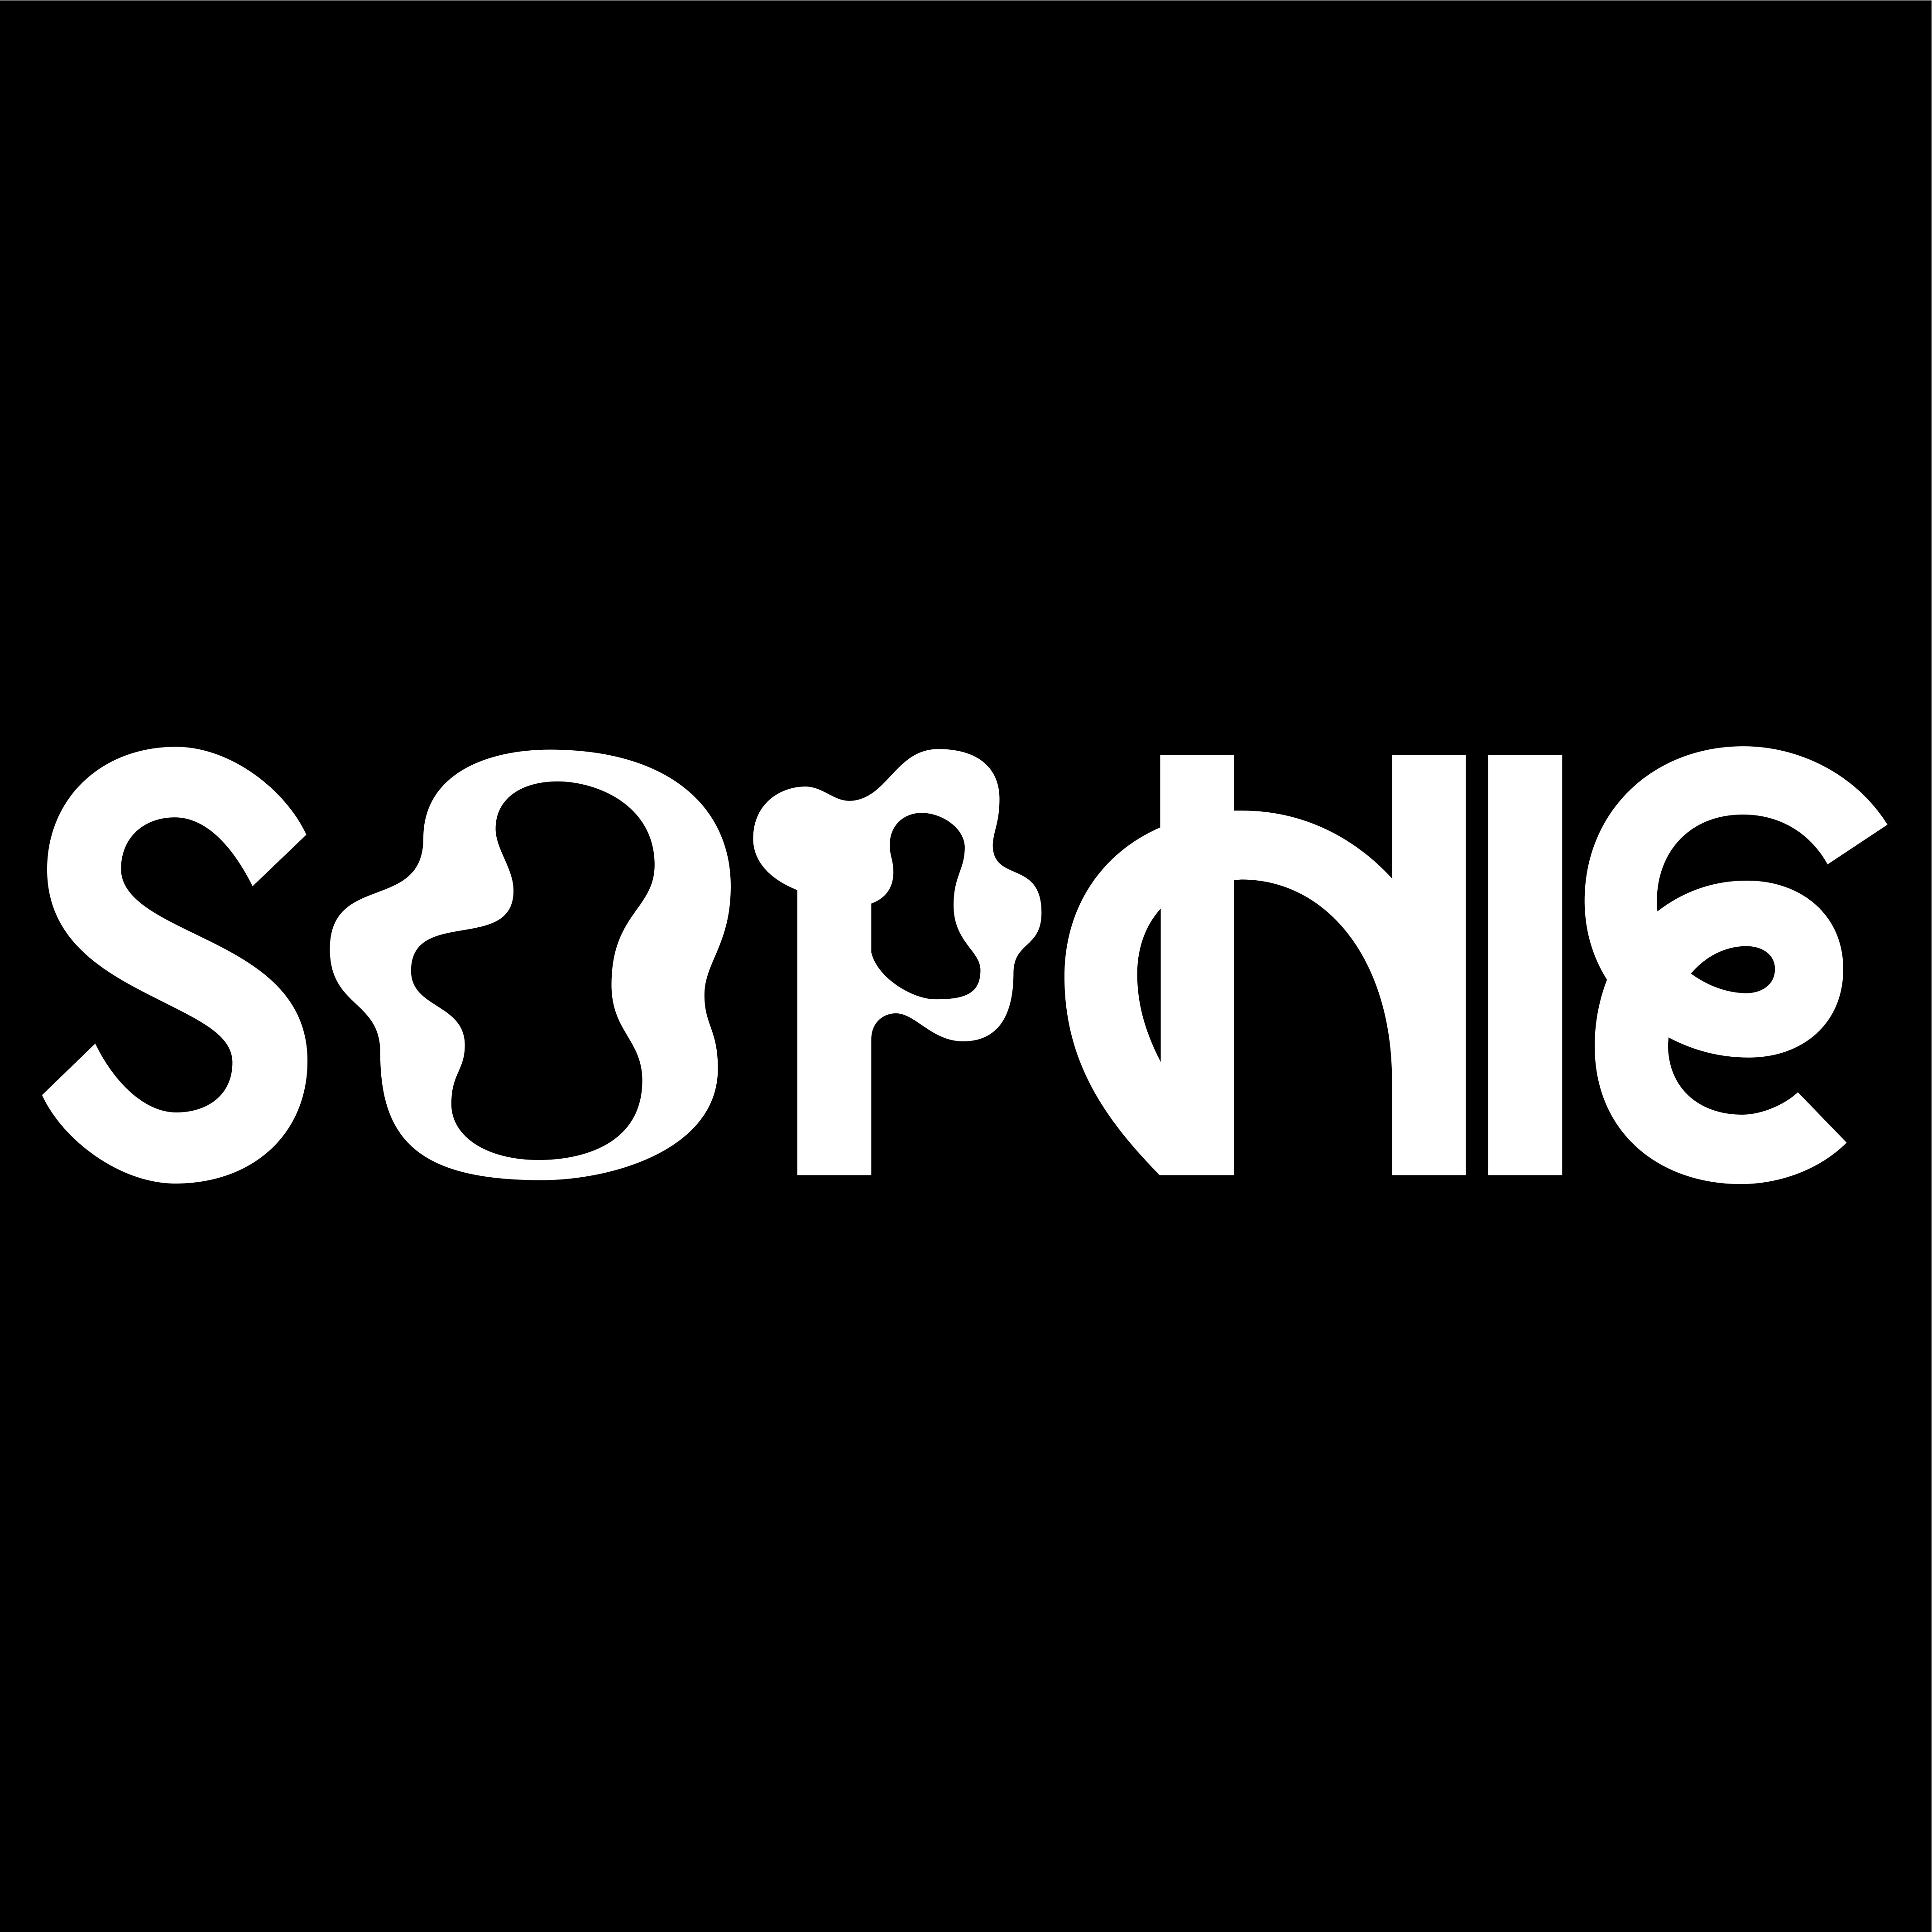 Luchdaich sìos FMM: SOPHIE - EEEHHH/Nothing More To Say